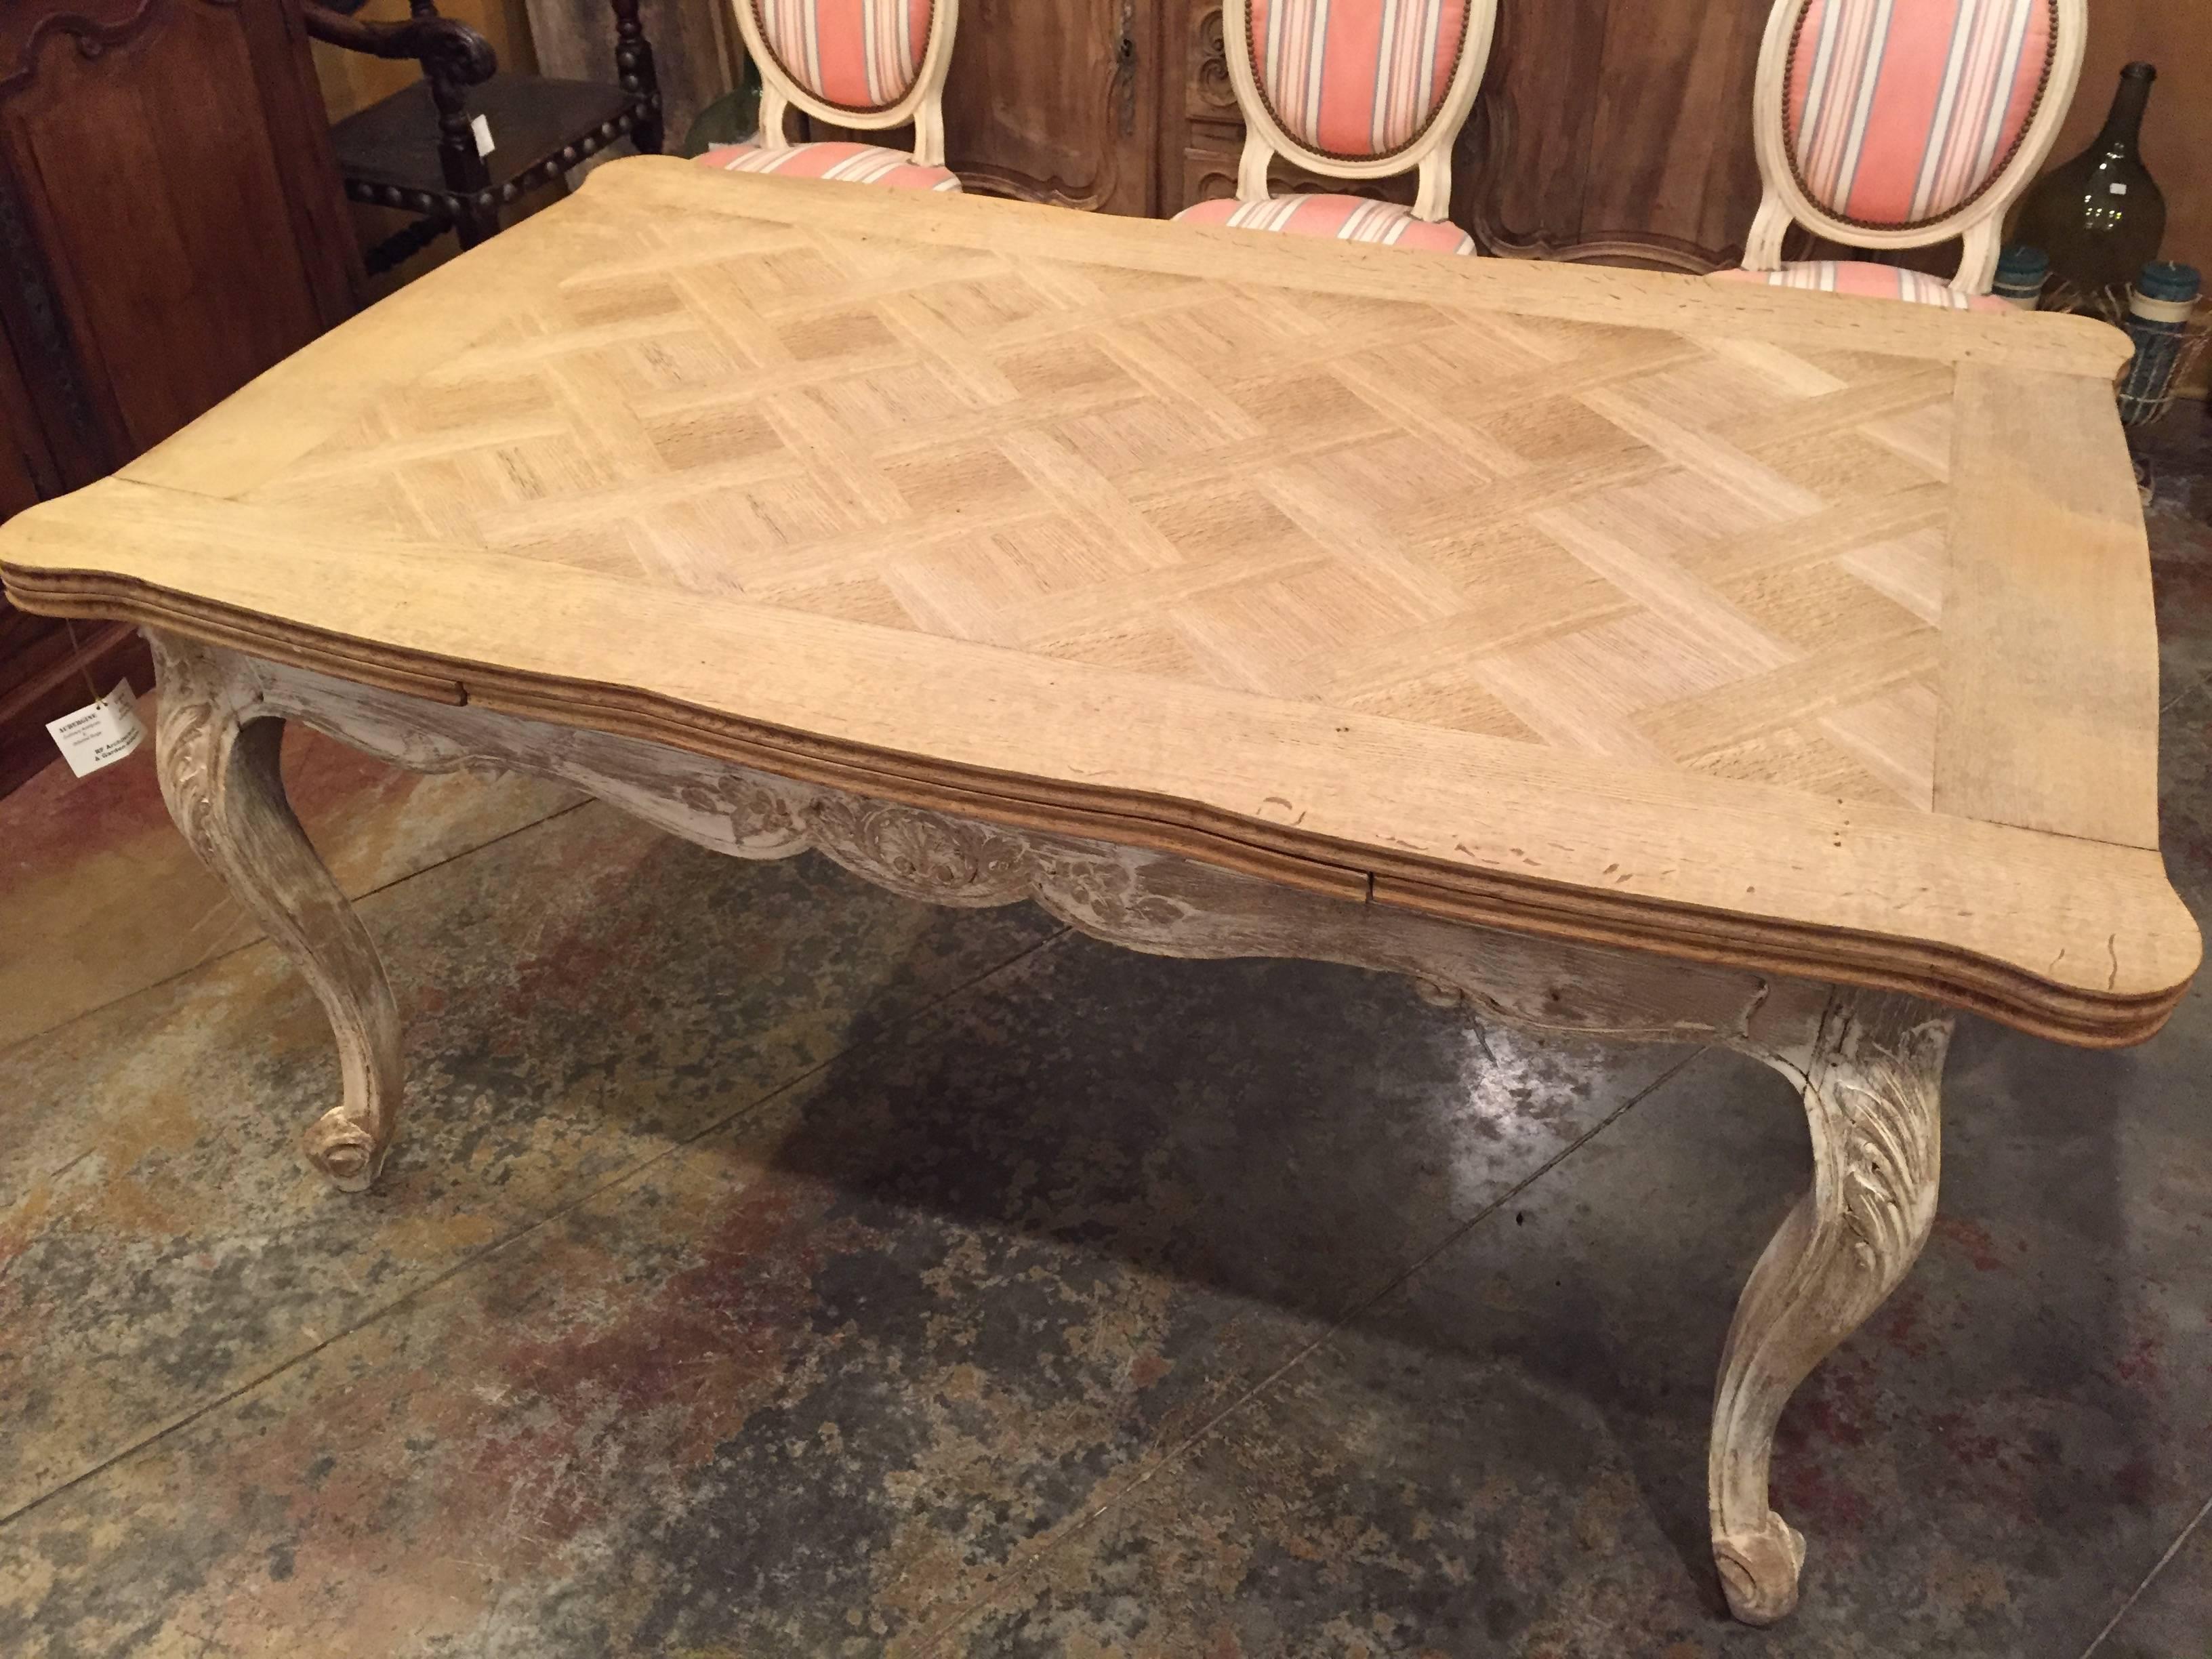 French draw-leaf dining table with a carefully stripped parquet top and painted base. The leaves can be easily drawn out without damaging the finish.

The table fully extended is 98